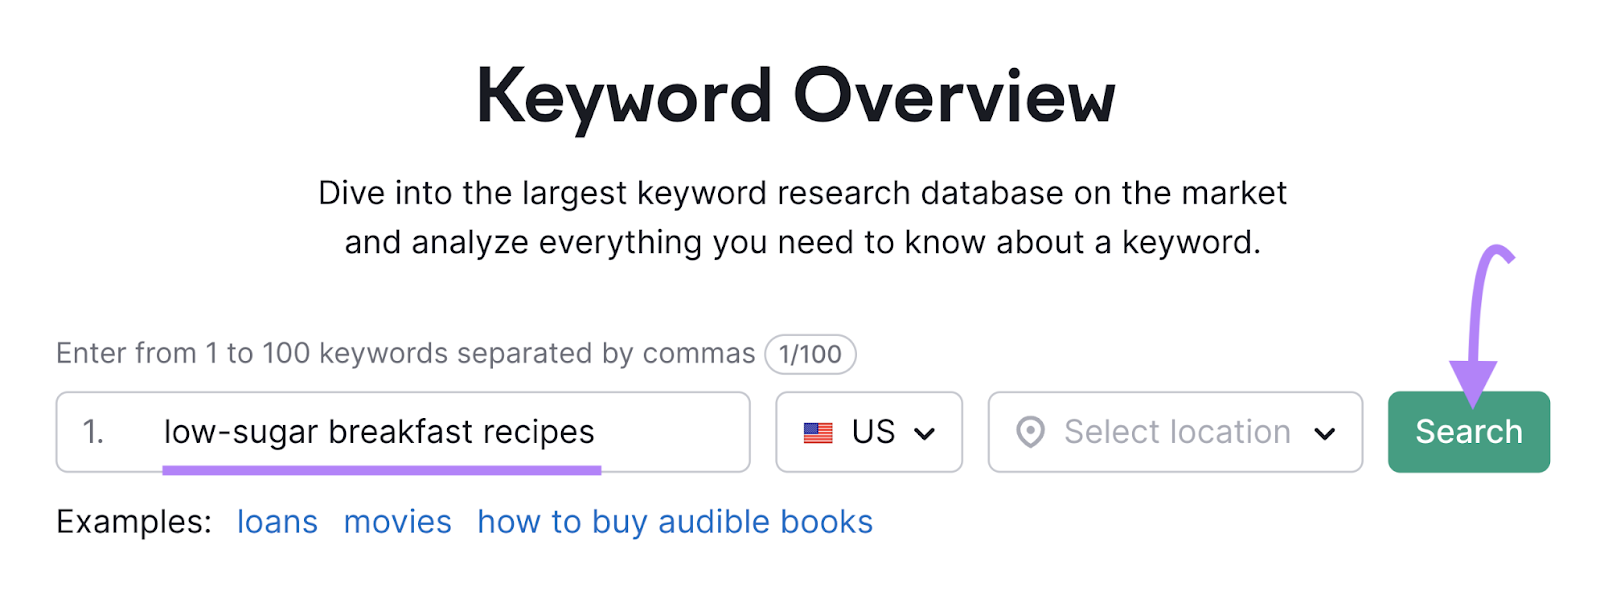 "low-sugar breakfast recipes” entered into the Keyword Overview tool